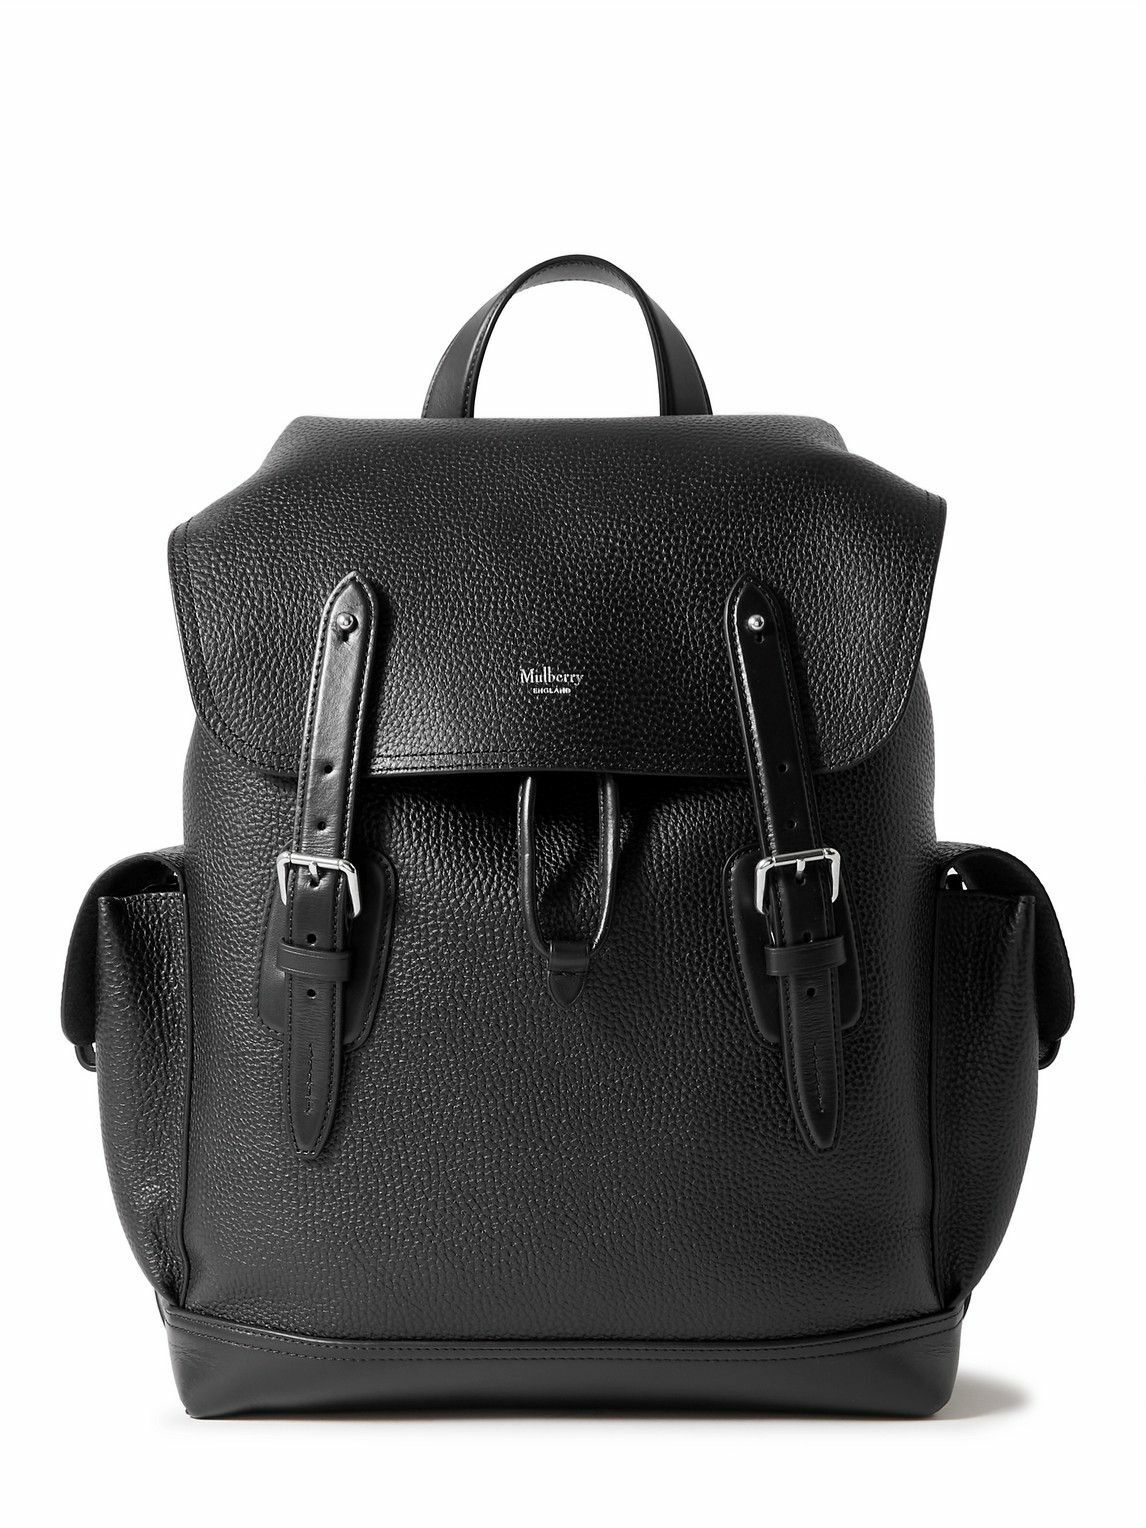 Mulberry - Heritage Pebble-Grain Leather Backpack Mulberry